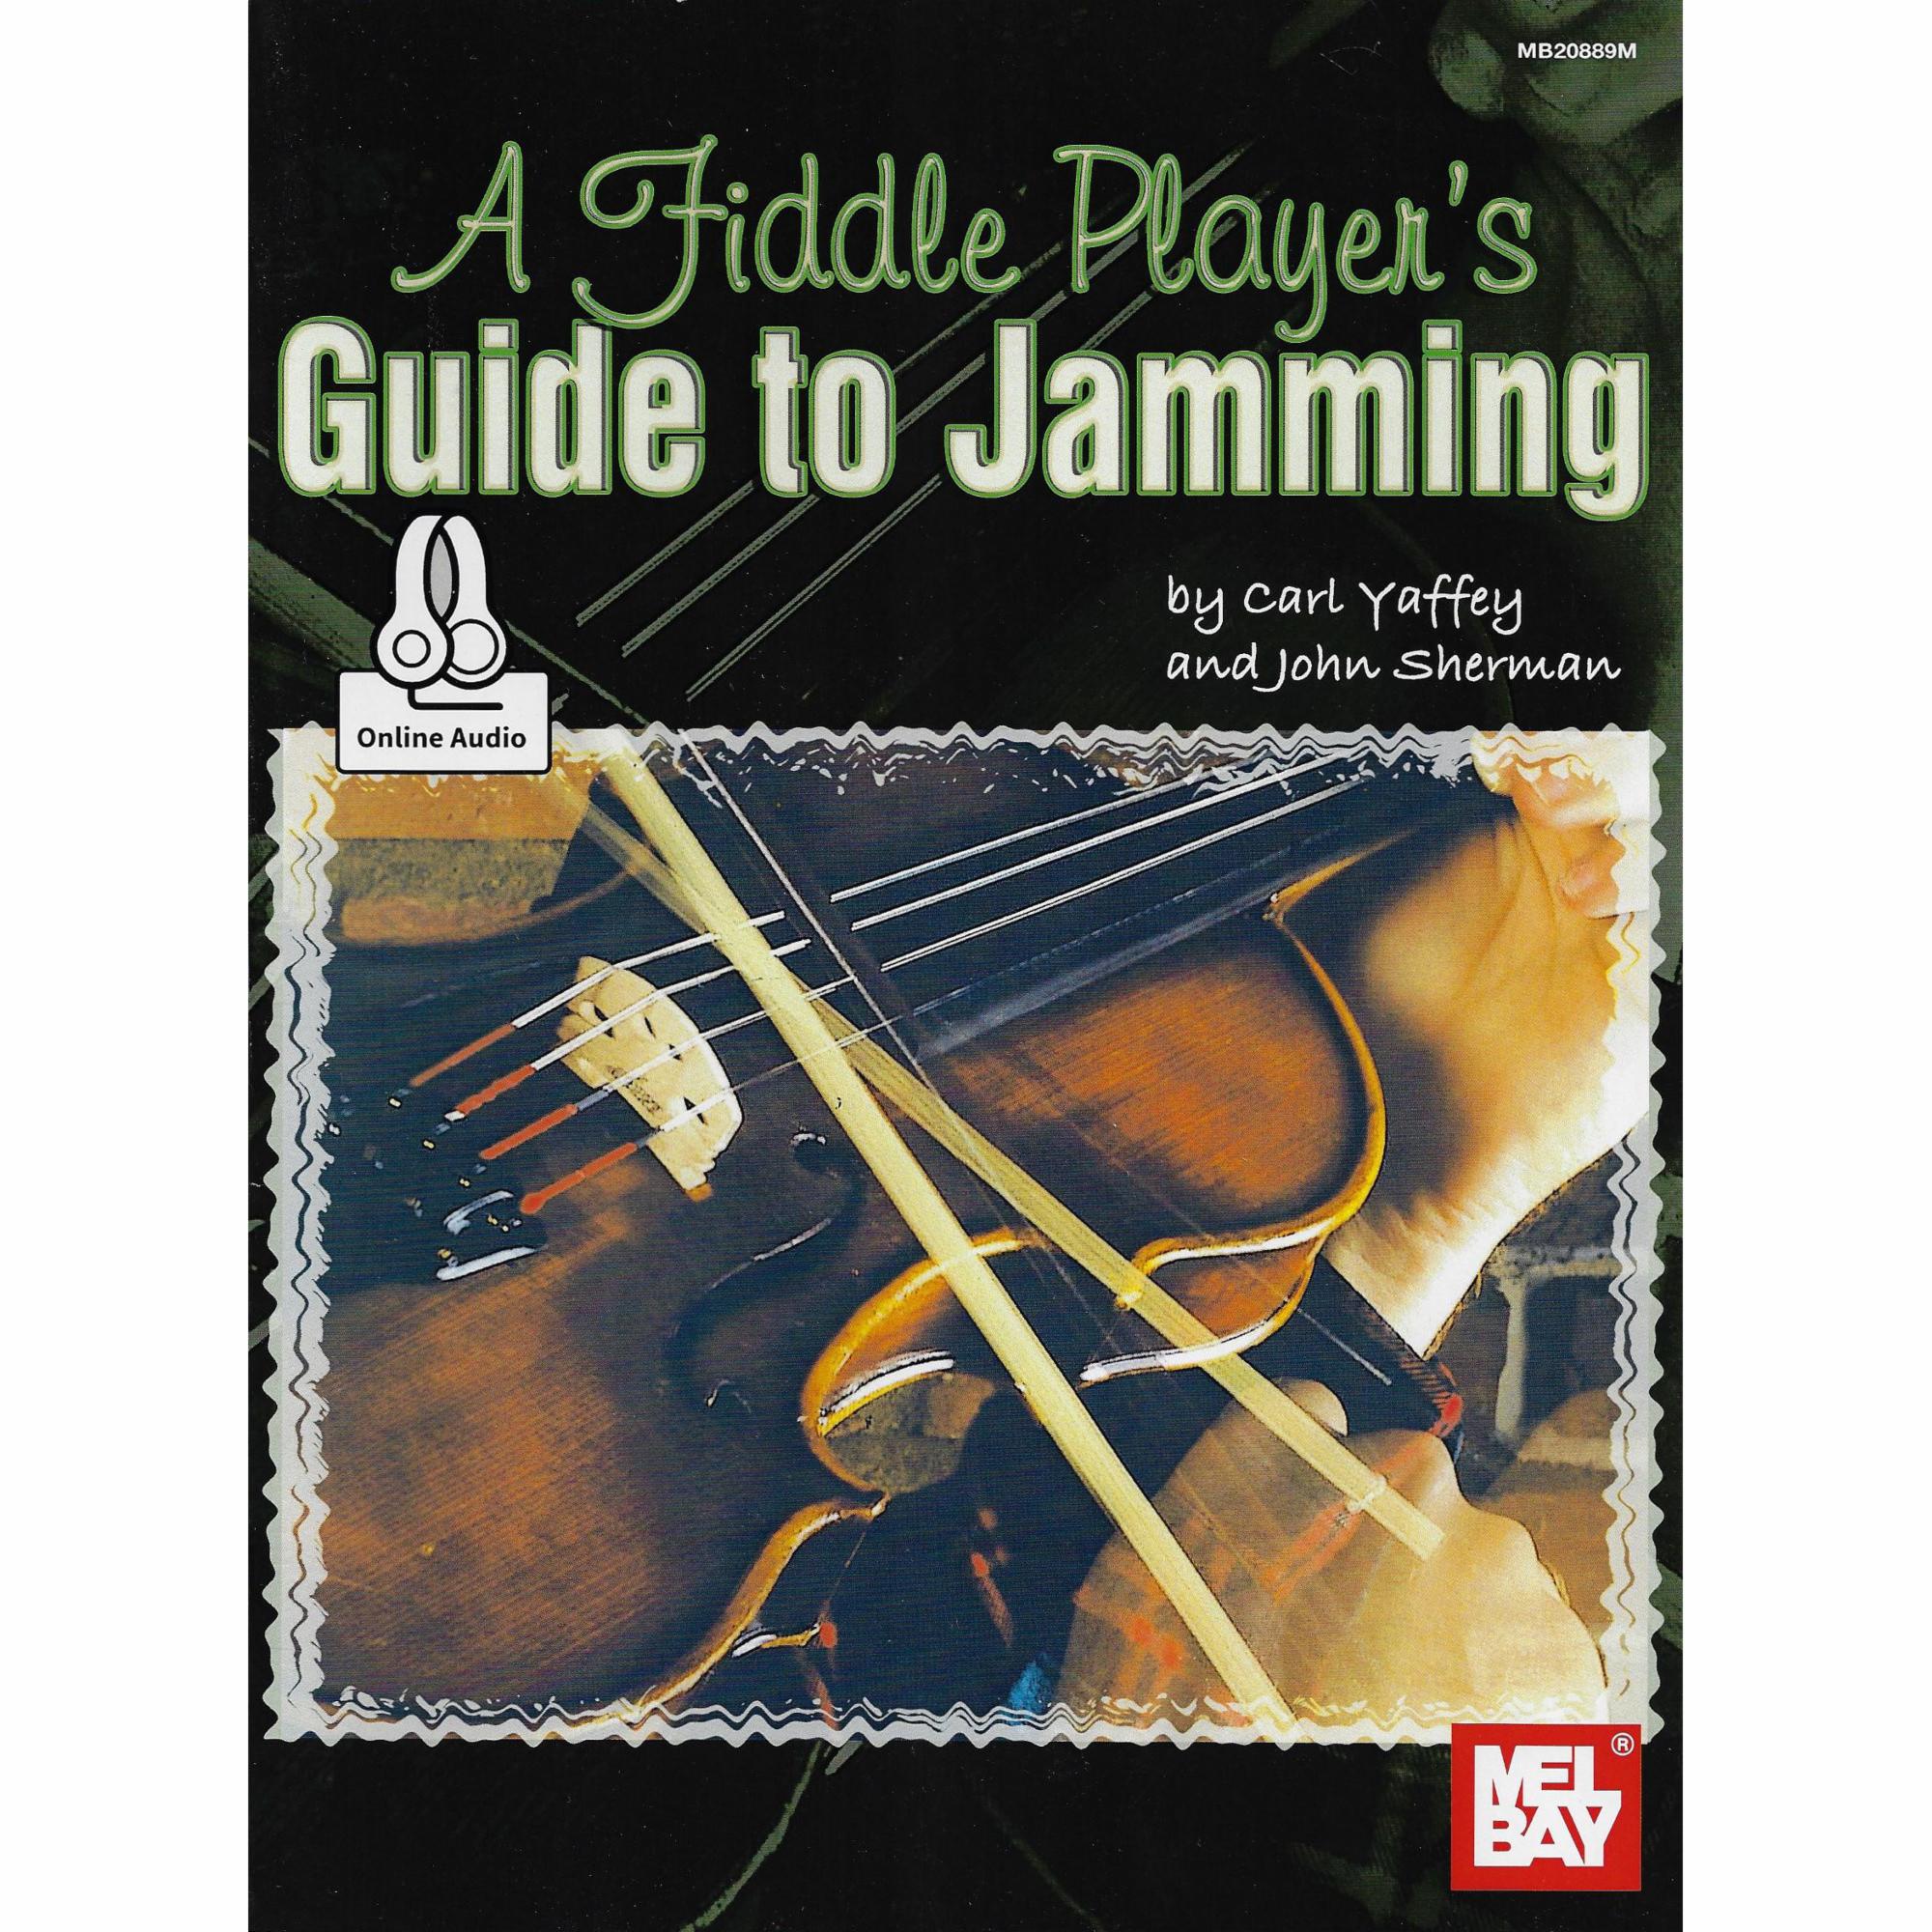 A Fiddle Player's Guide to Jamming